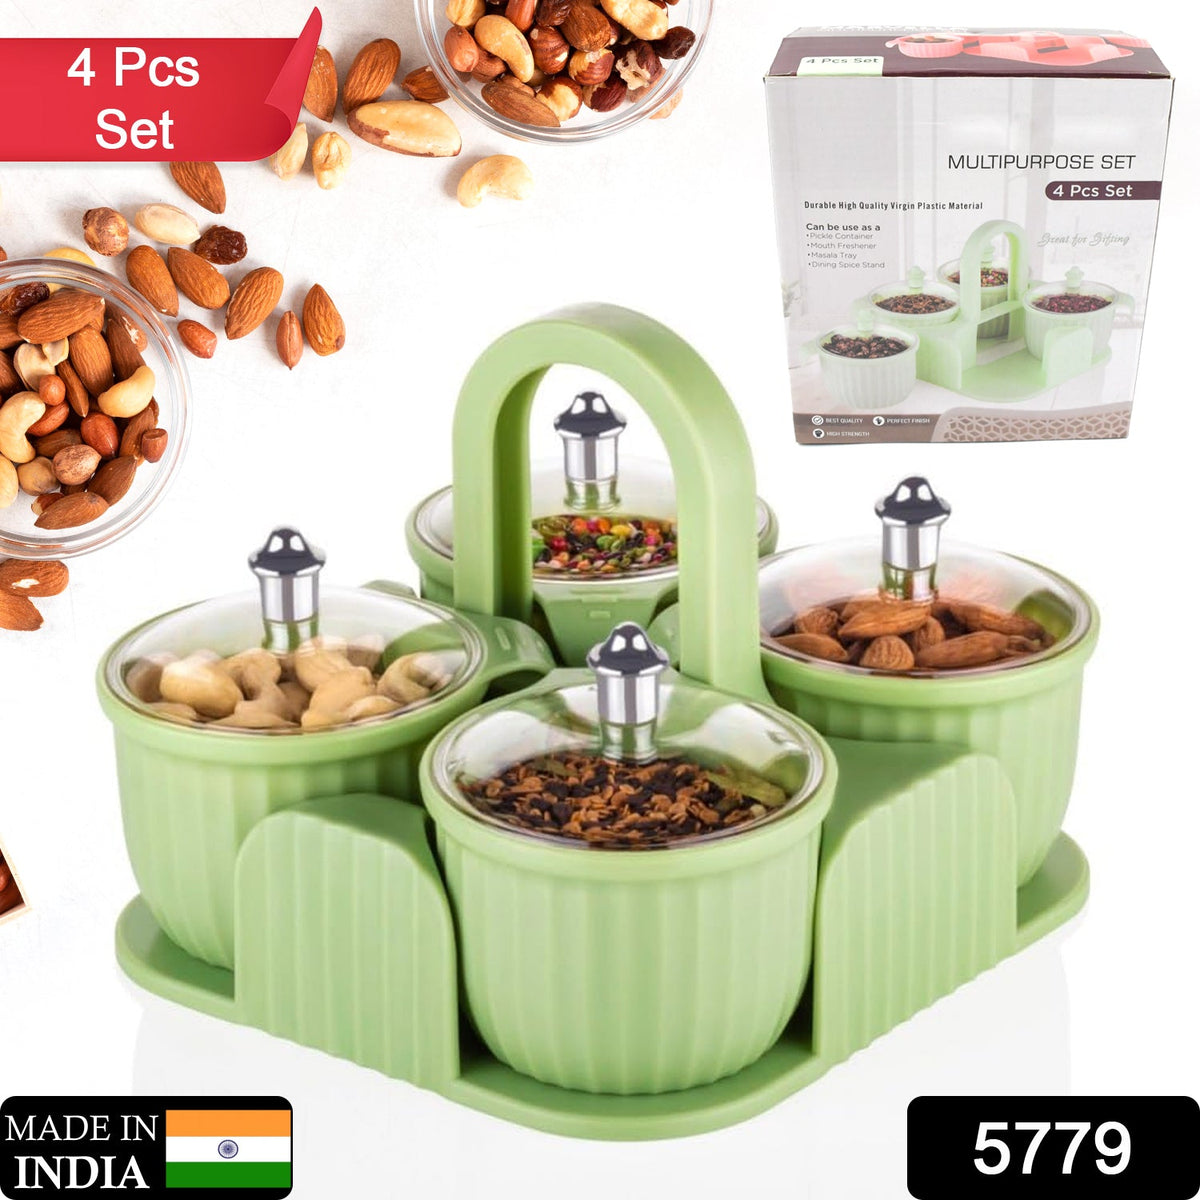 5779 Multipurpose Jar Dryfruit Set,  Candy, Chocolate, Snacks Storage Jar, Masala Jar  for Home and Kitchen Airtight Dry Fruit Plastic Storage Container Tray Set With Lid & 4 Serving Jar Container for Sweets,Chips,Cookies|(4 Pc Set)